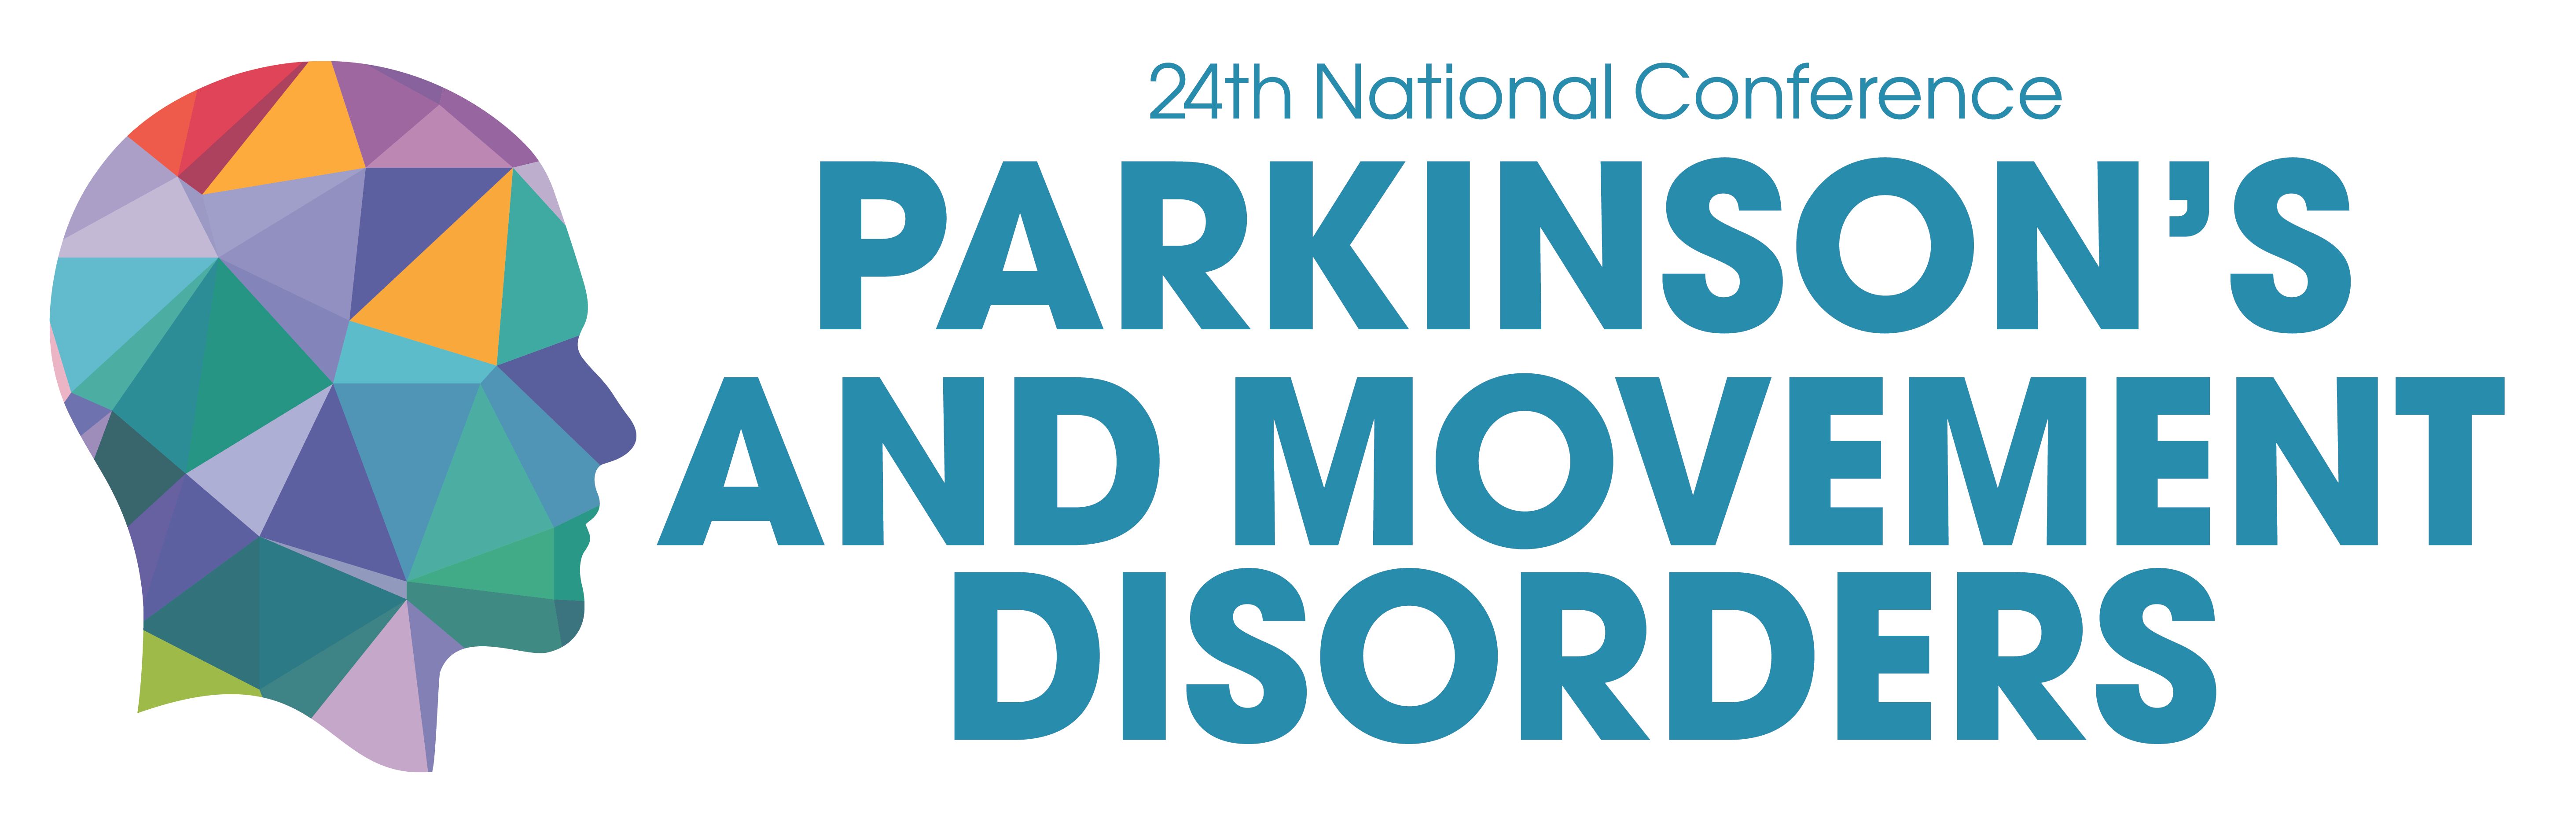 Parkinsons and Movement disorders